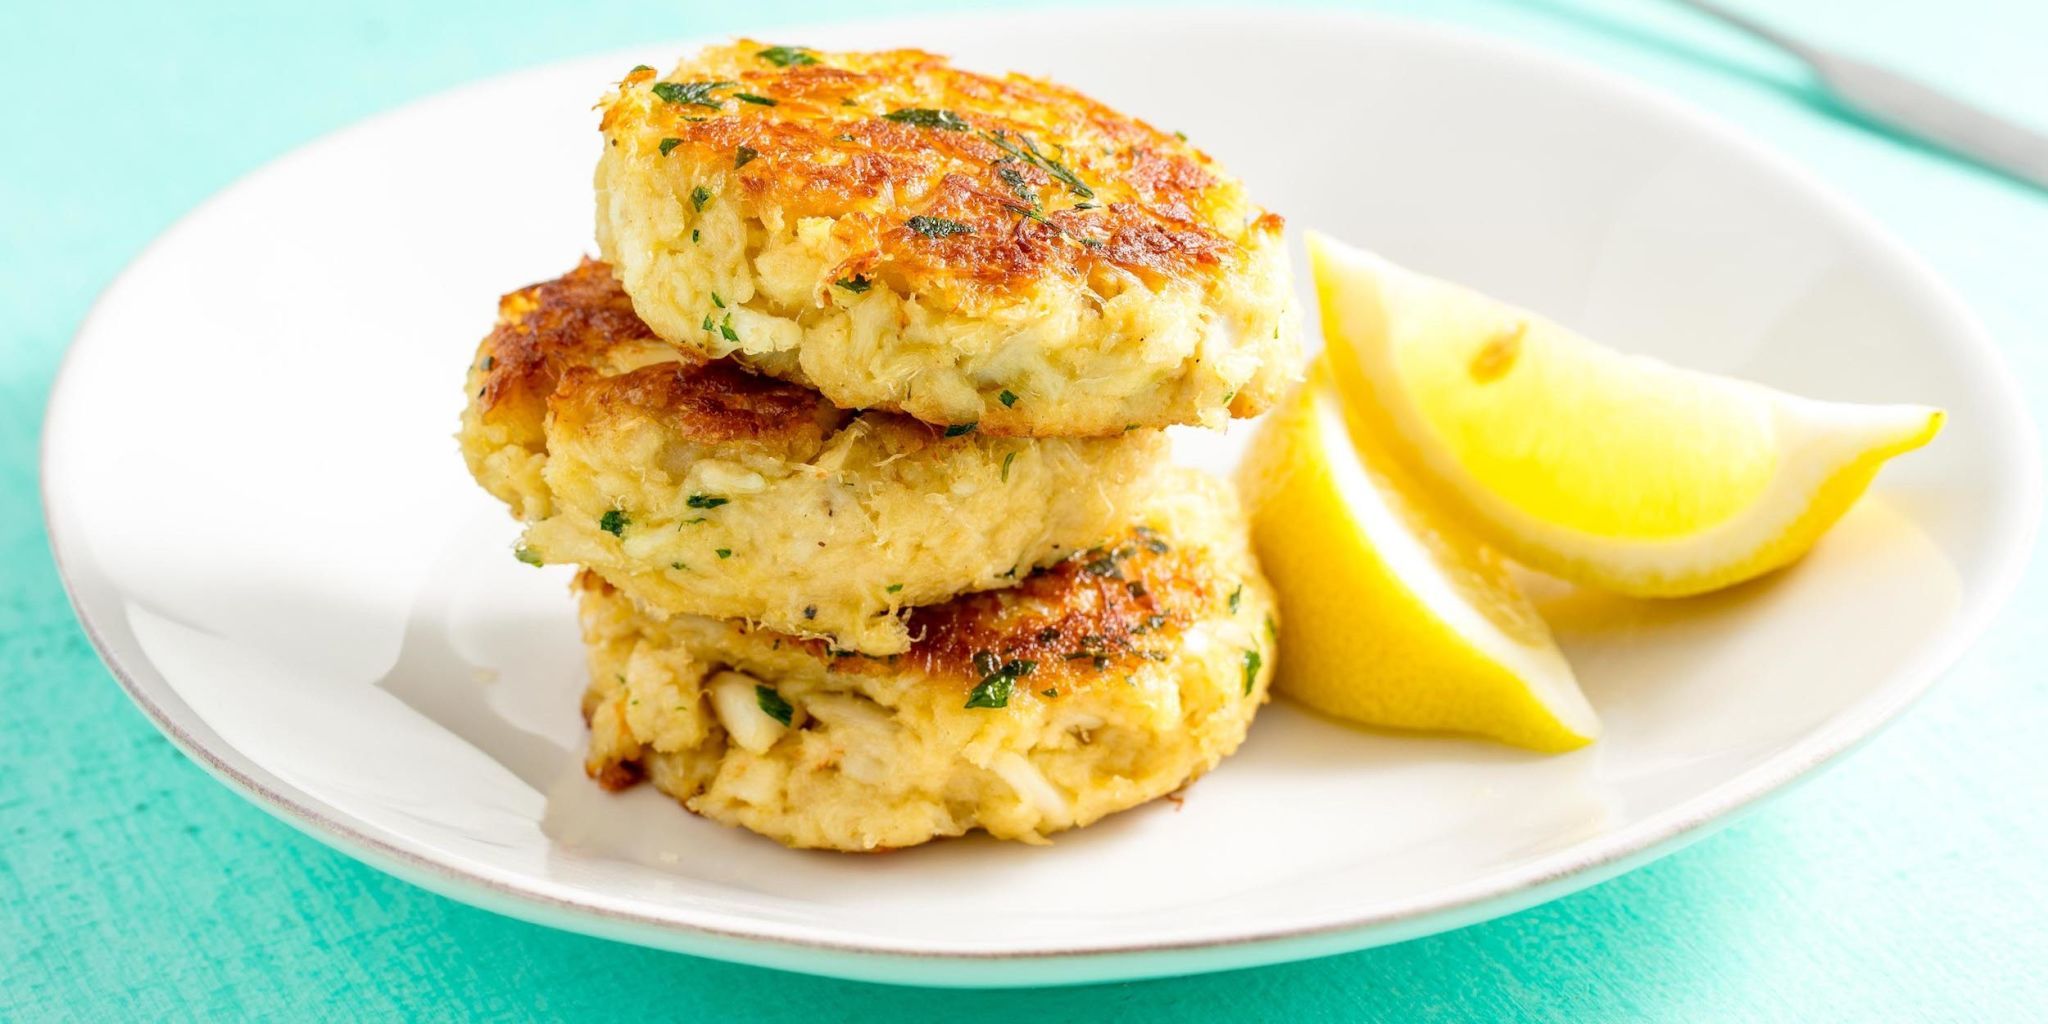 Best Mail Order Crab Cakes | Shipped Jumbo Lump Crab Cakes